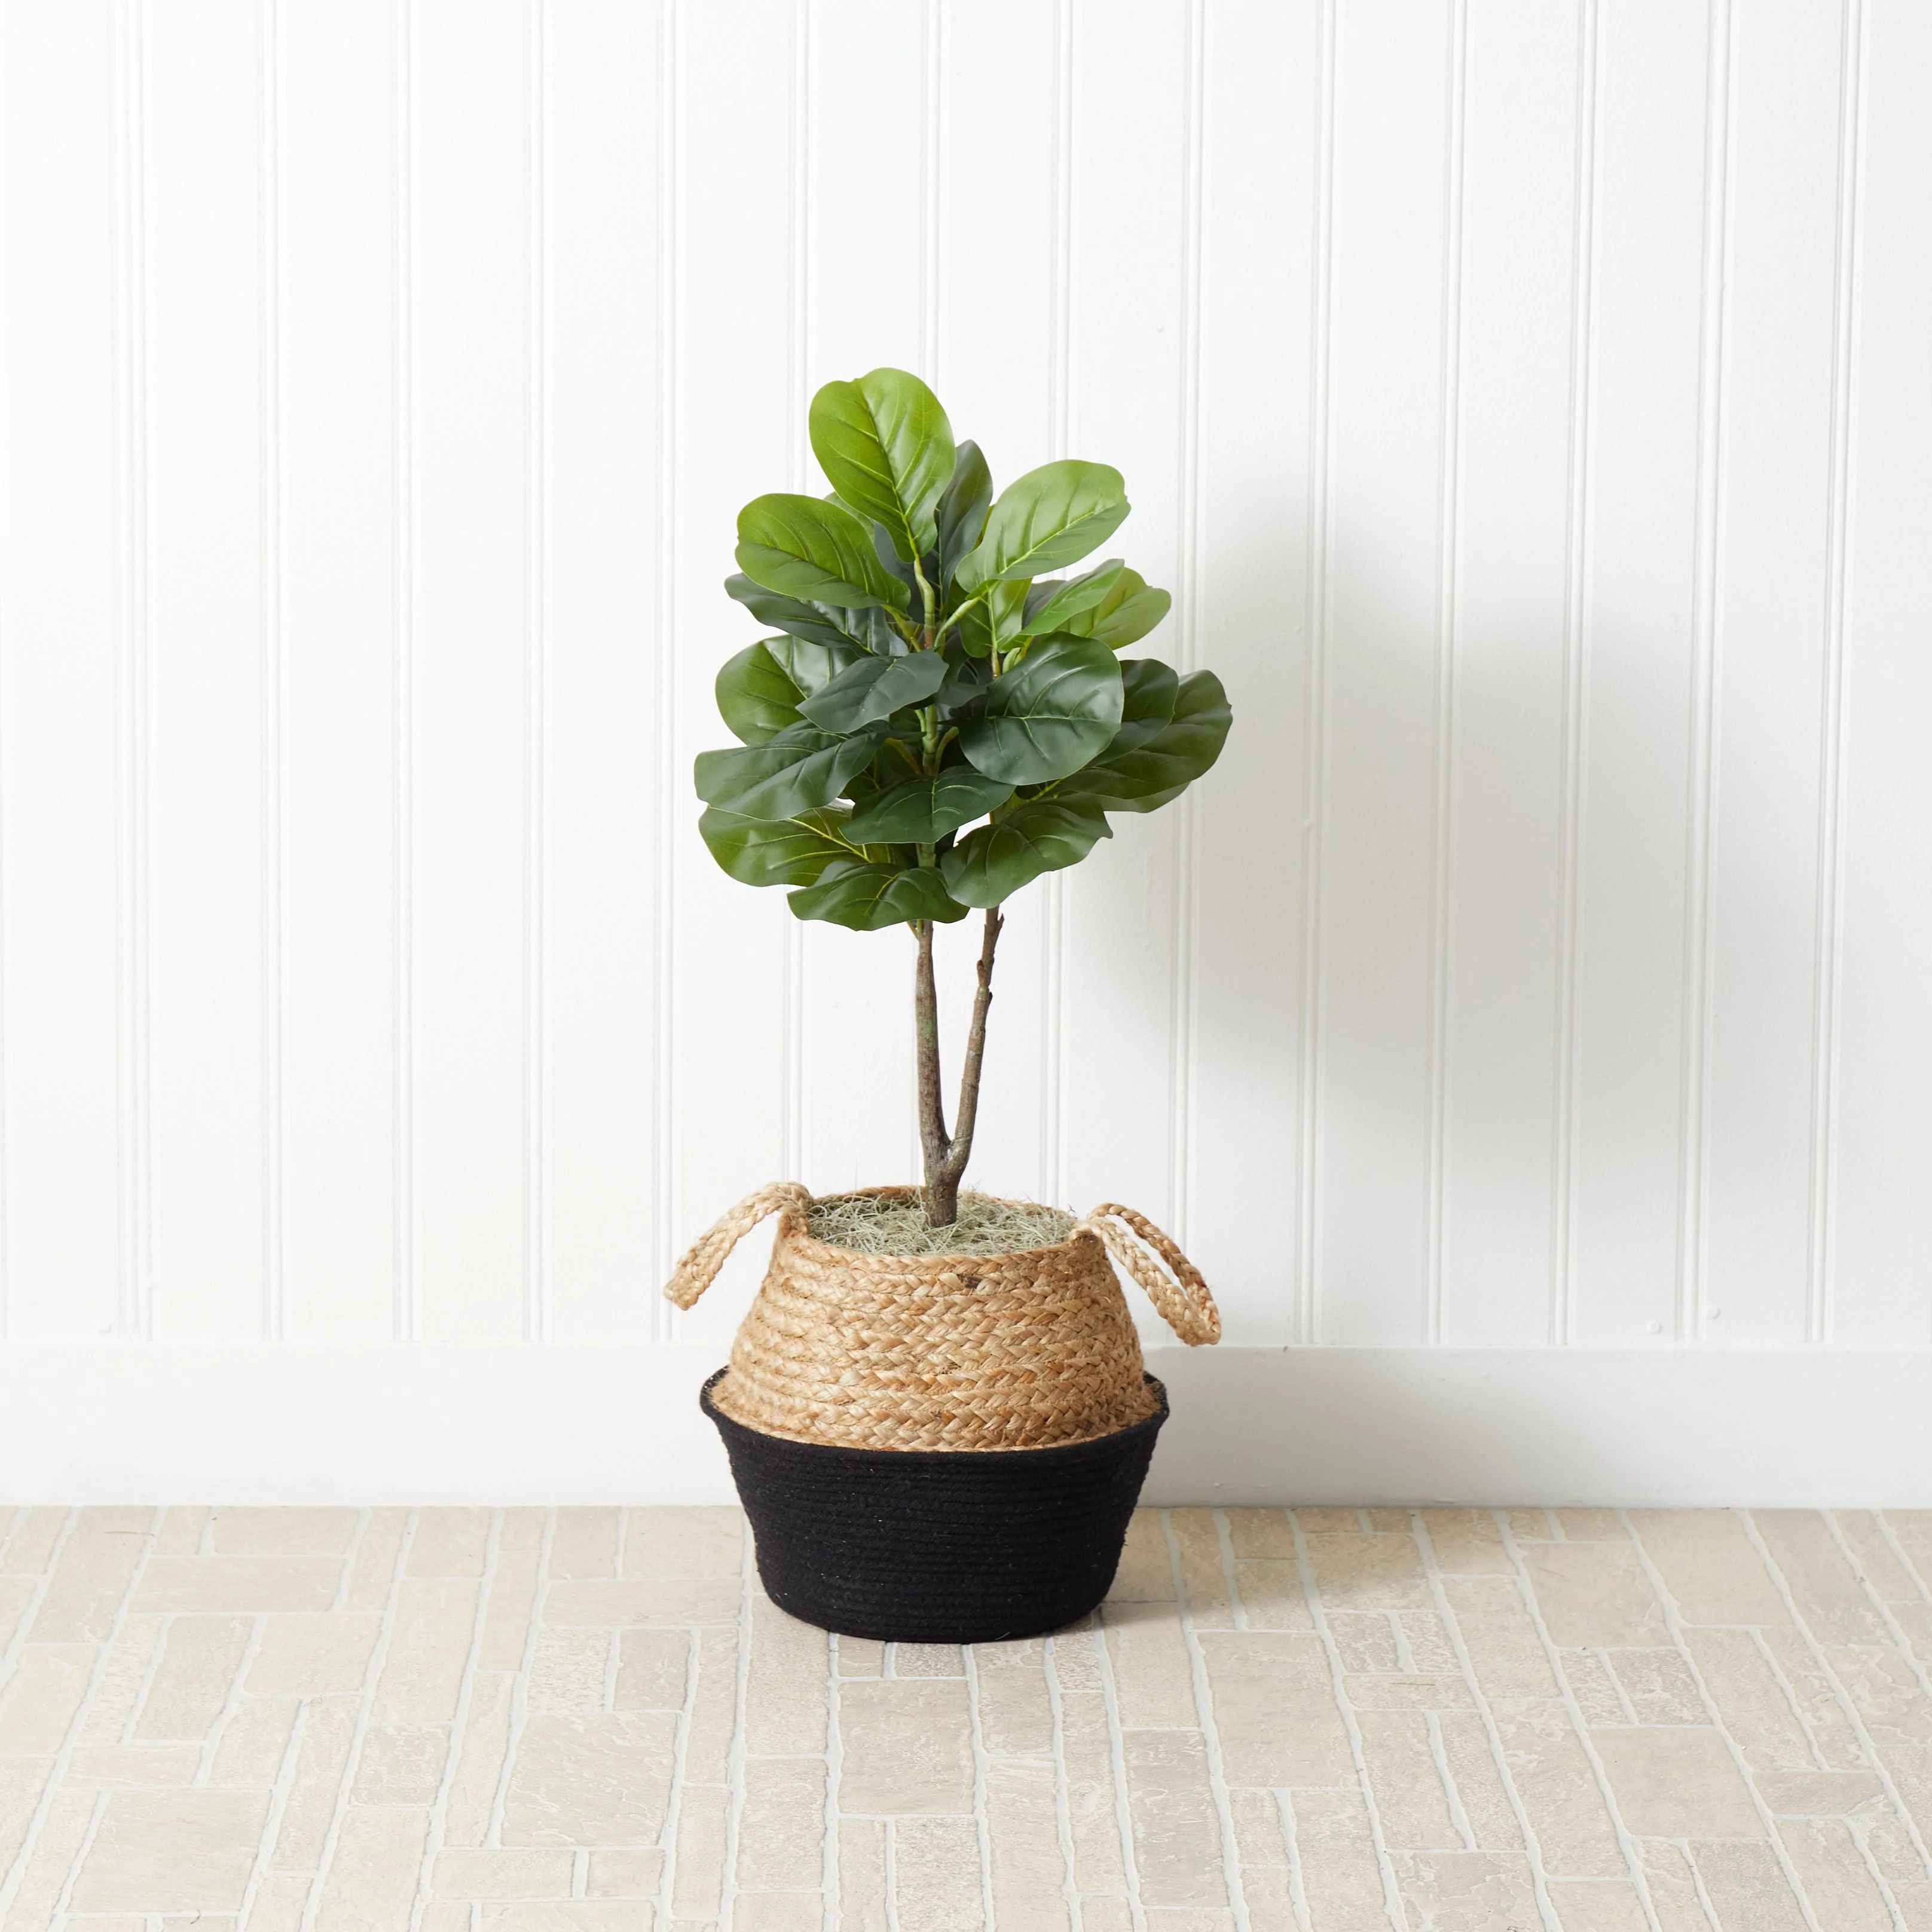 3' Artificial Fiddle Leaf Fig Tree with Handmade Cotton & Jute Woven Basket DIY Kit | Nearly Natural